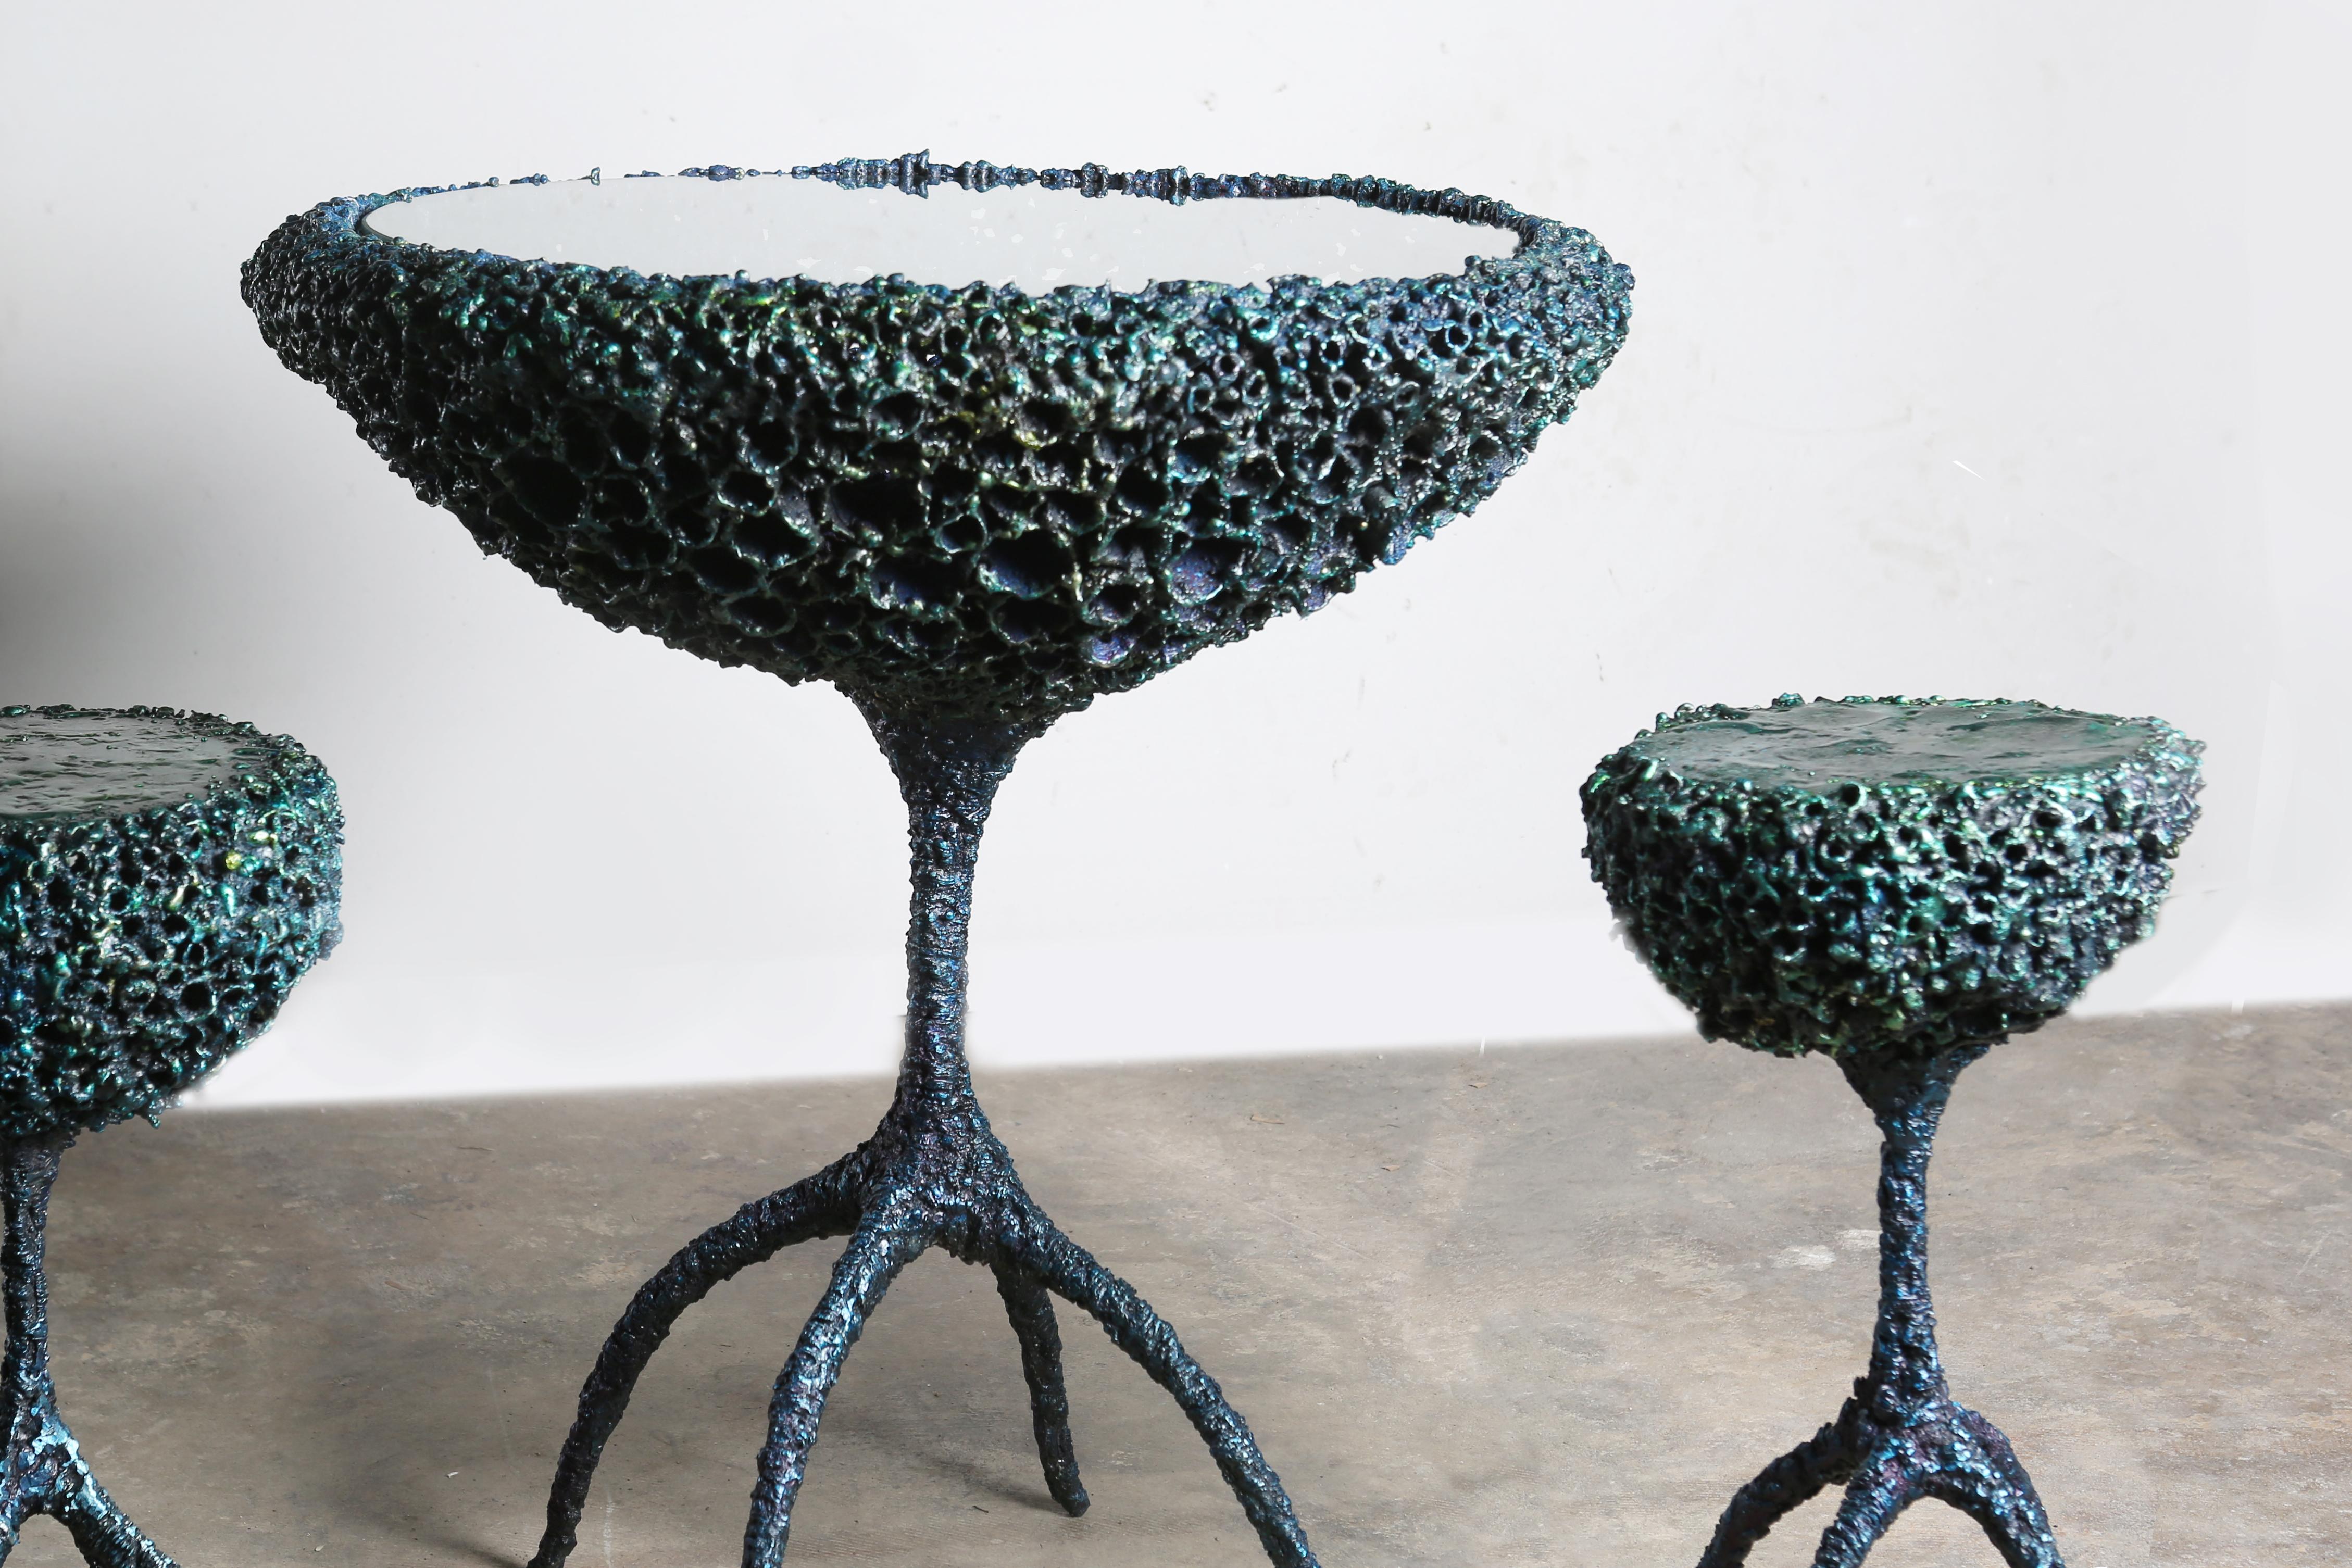 Elysium series round table on sinuous, biomorphic legs with two matching stools of torch-cut and patinated steel, dyed bronze, and clear coat. By American artist James Bearden. The textured exterior of the set and the relatively smooth top of the